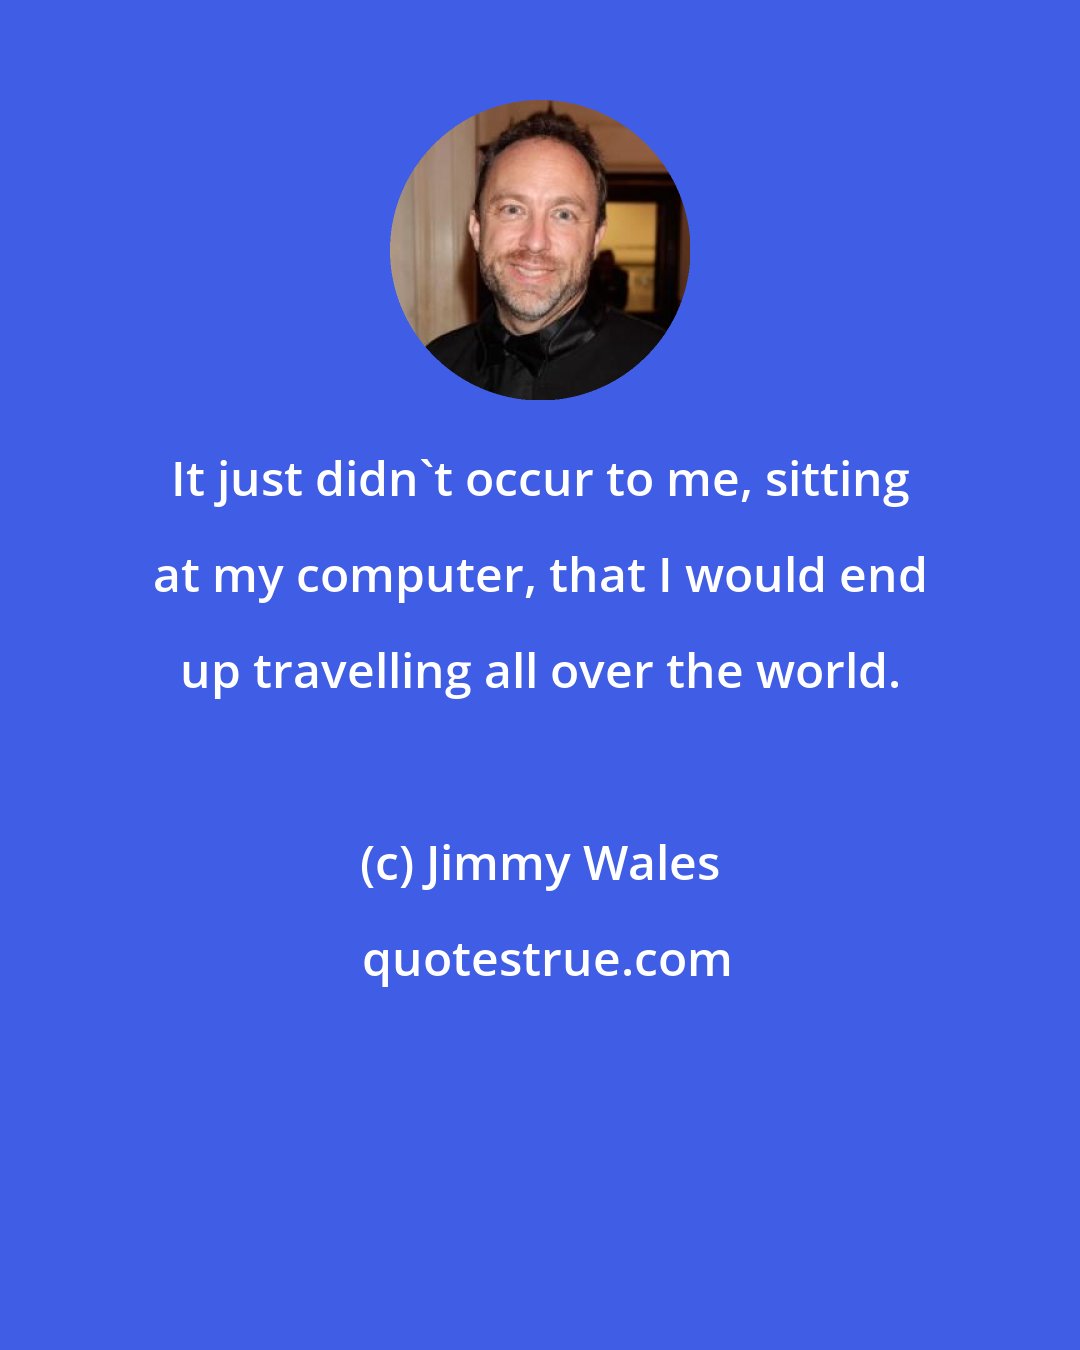 Jimmy Wales: It just didn't occur to me, sitting at my computer, that I would end up travelling all over the world.